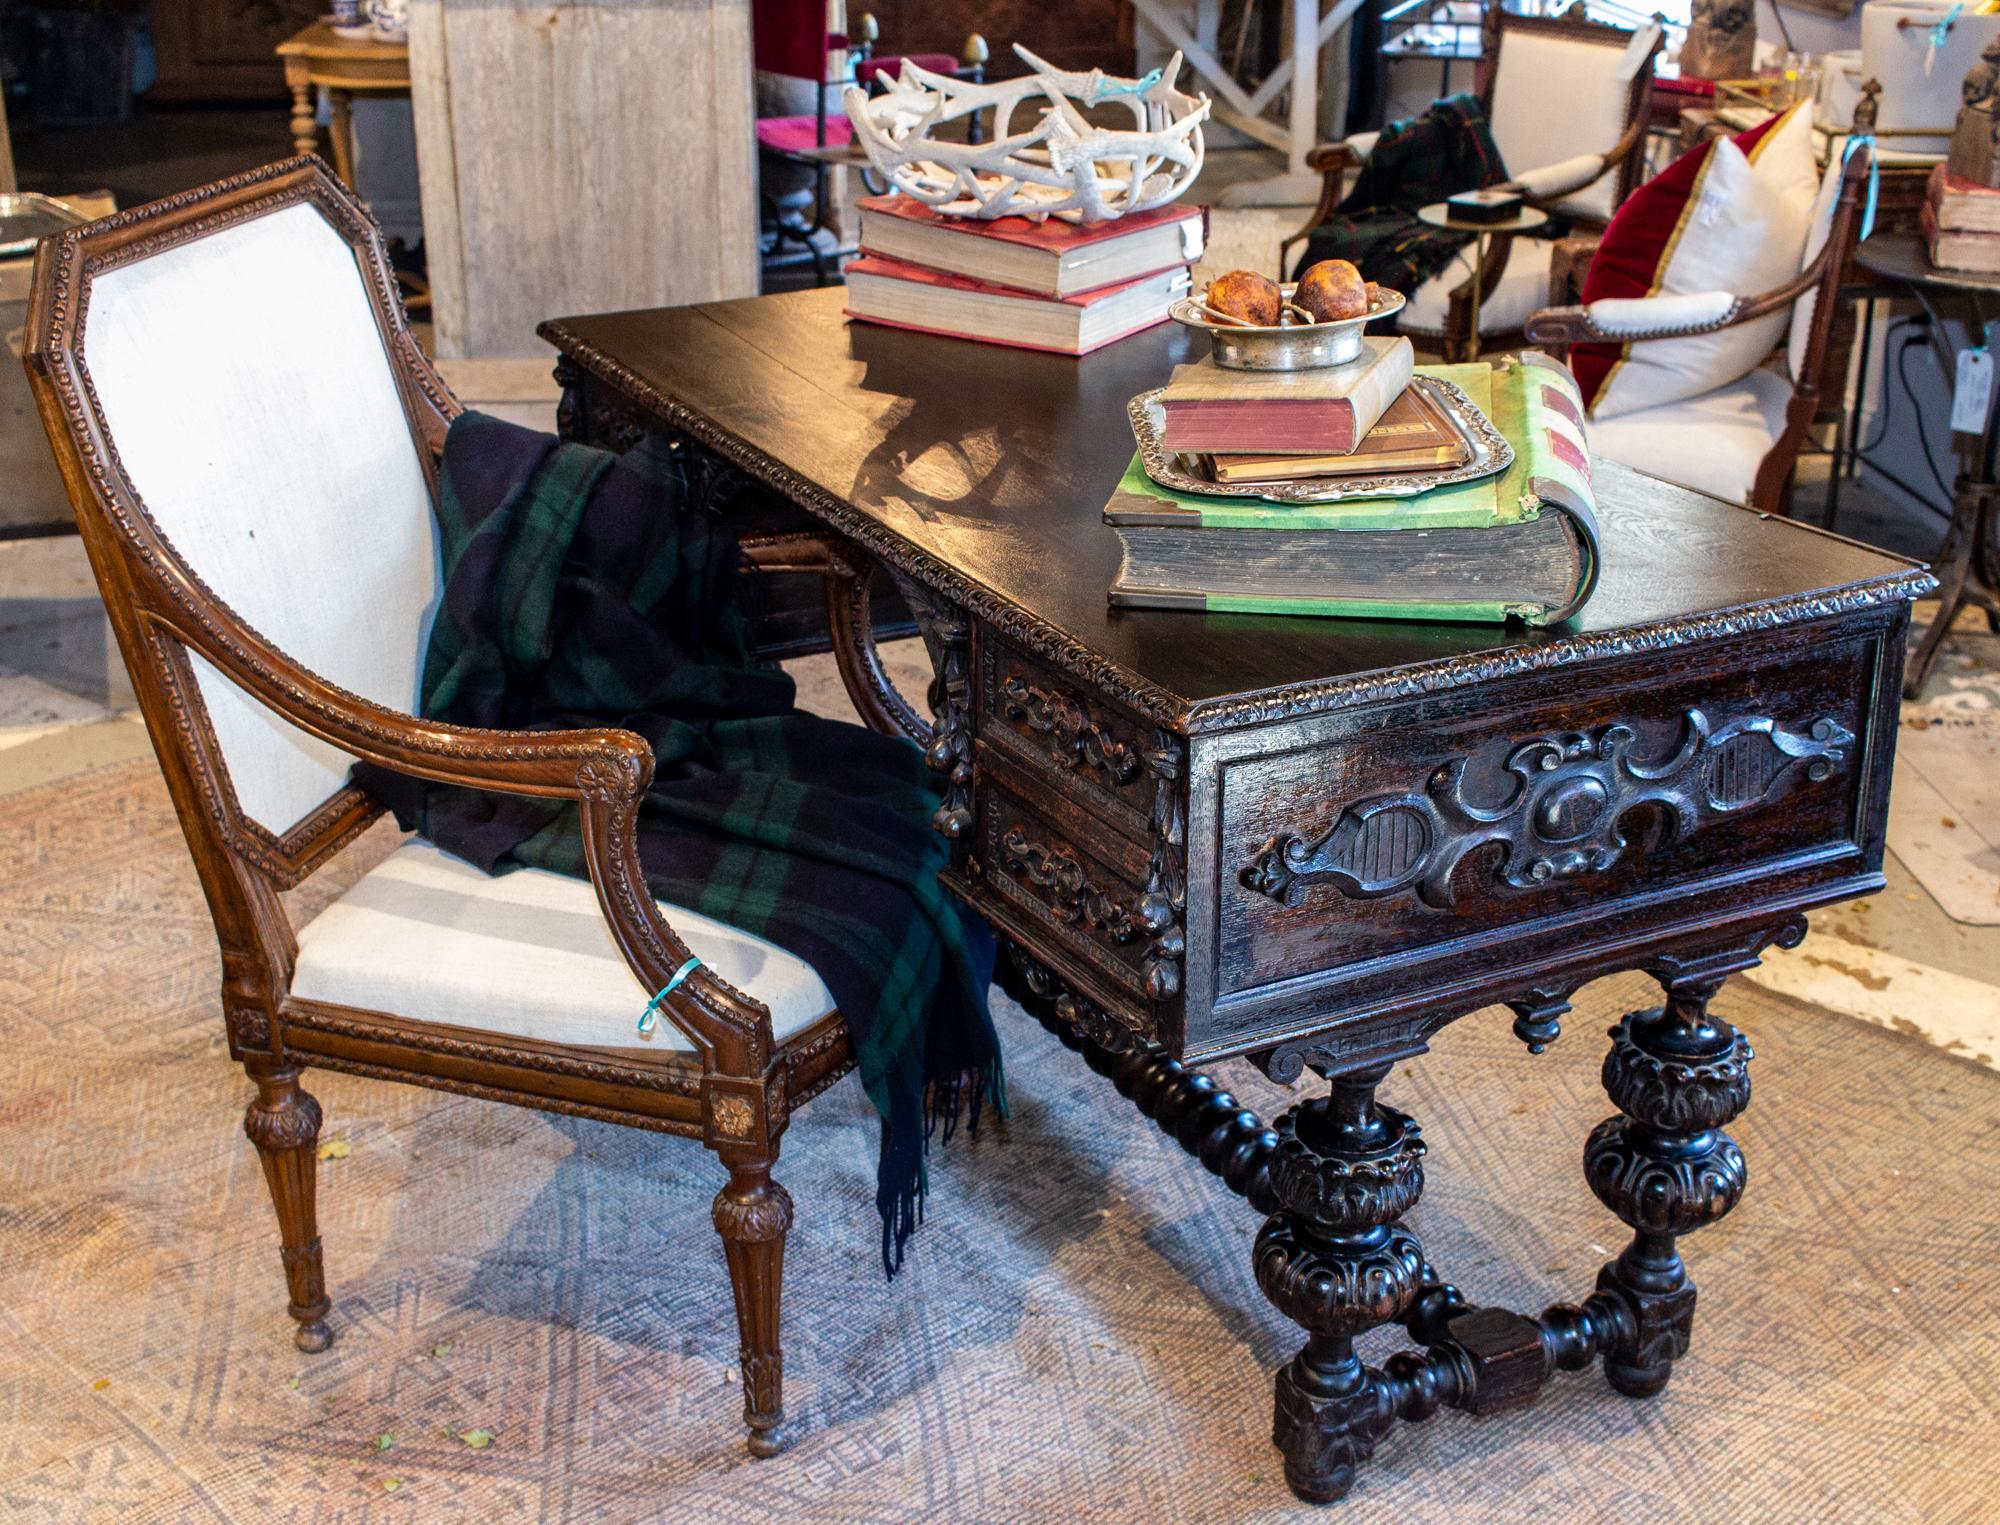 This is an antique Jacobean revival styled desk with four drawers and beautifully carved details. The edge of the top of the desk is hand carved along with the front and sides, with palmettes and floral carvings. The legs are beautifully turned in